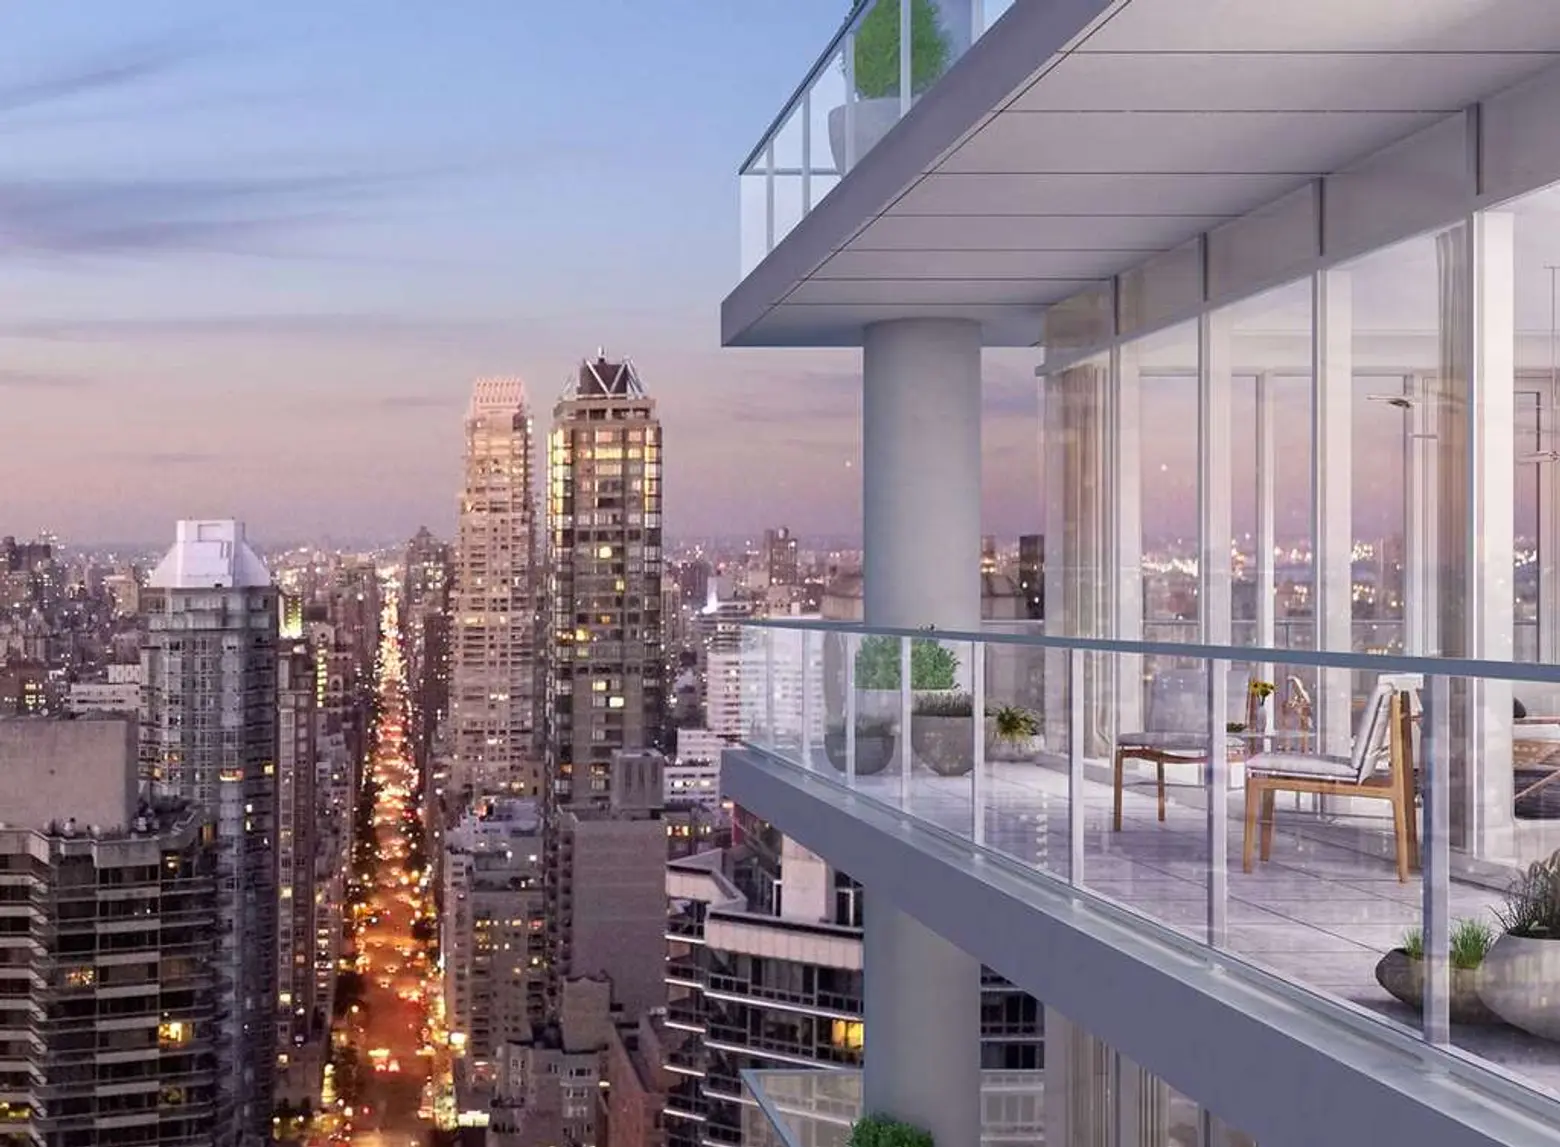 2018 Manhattan condo sales show volume drop and price cooldown from last year’s soaring heights